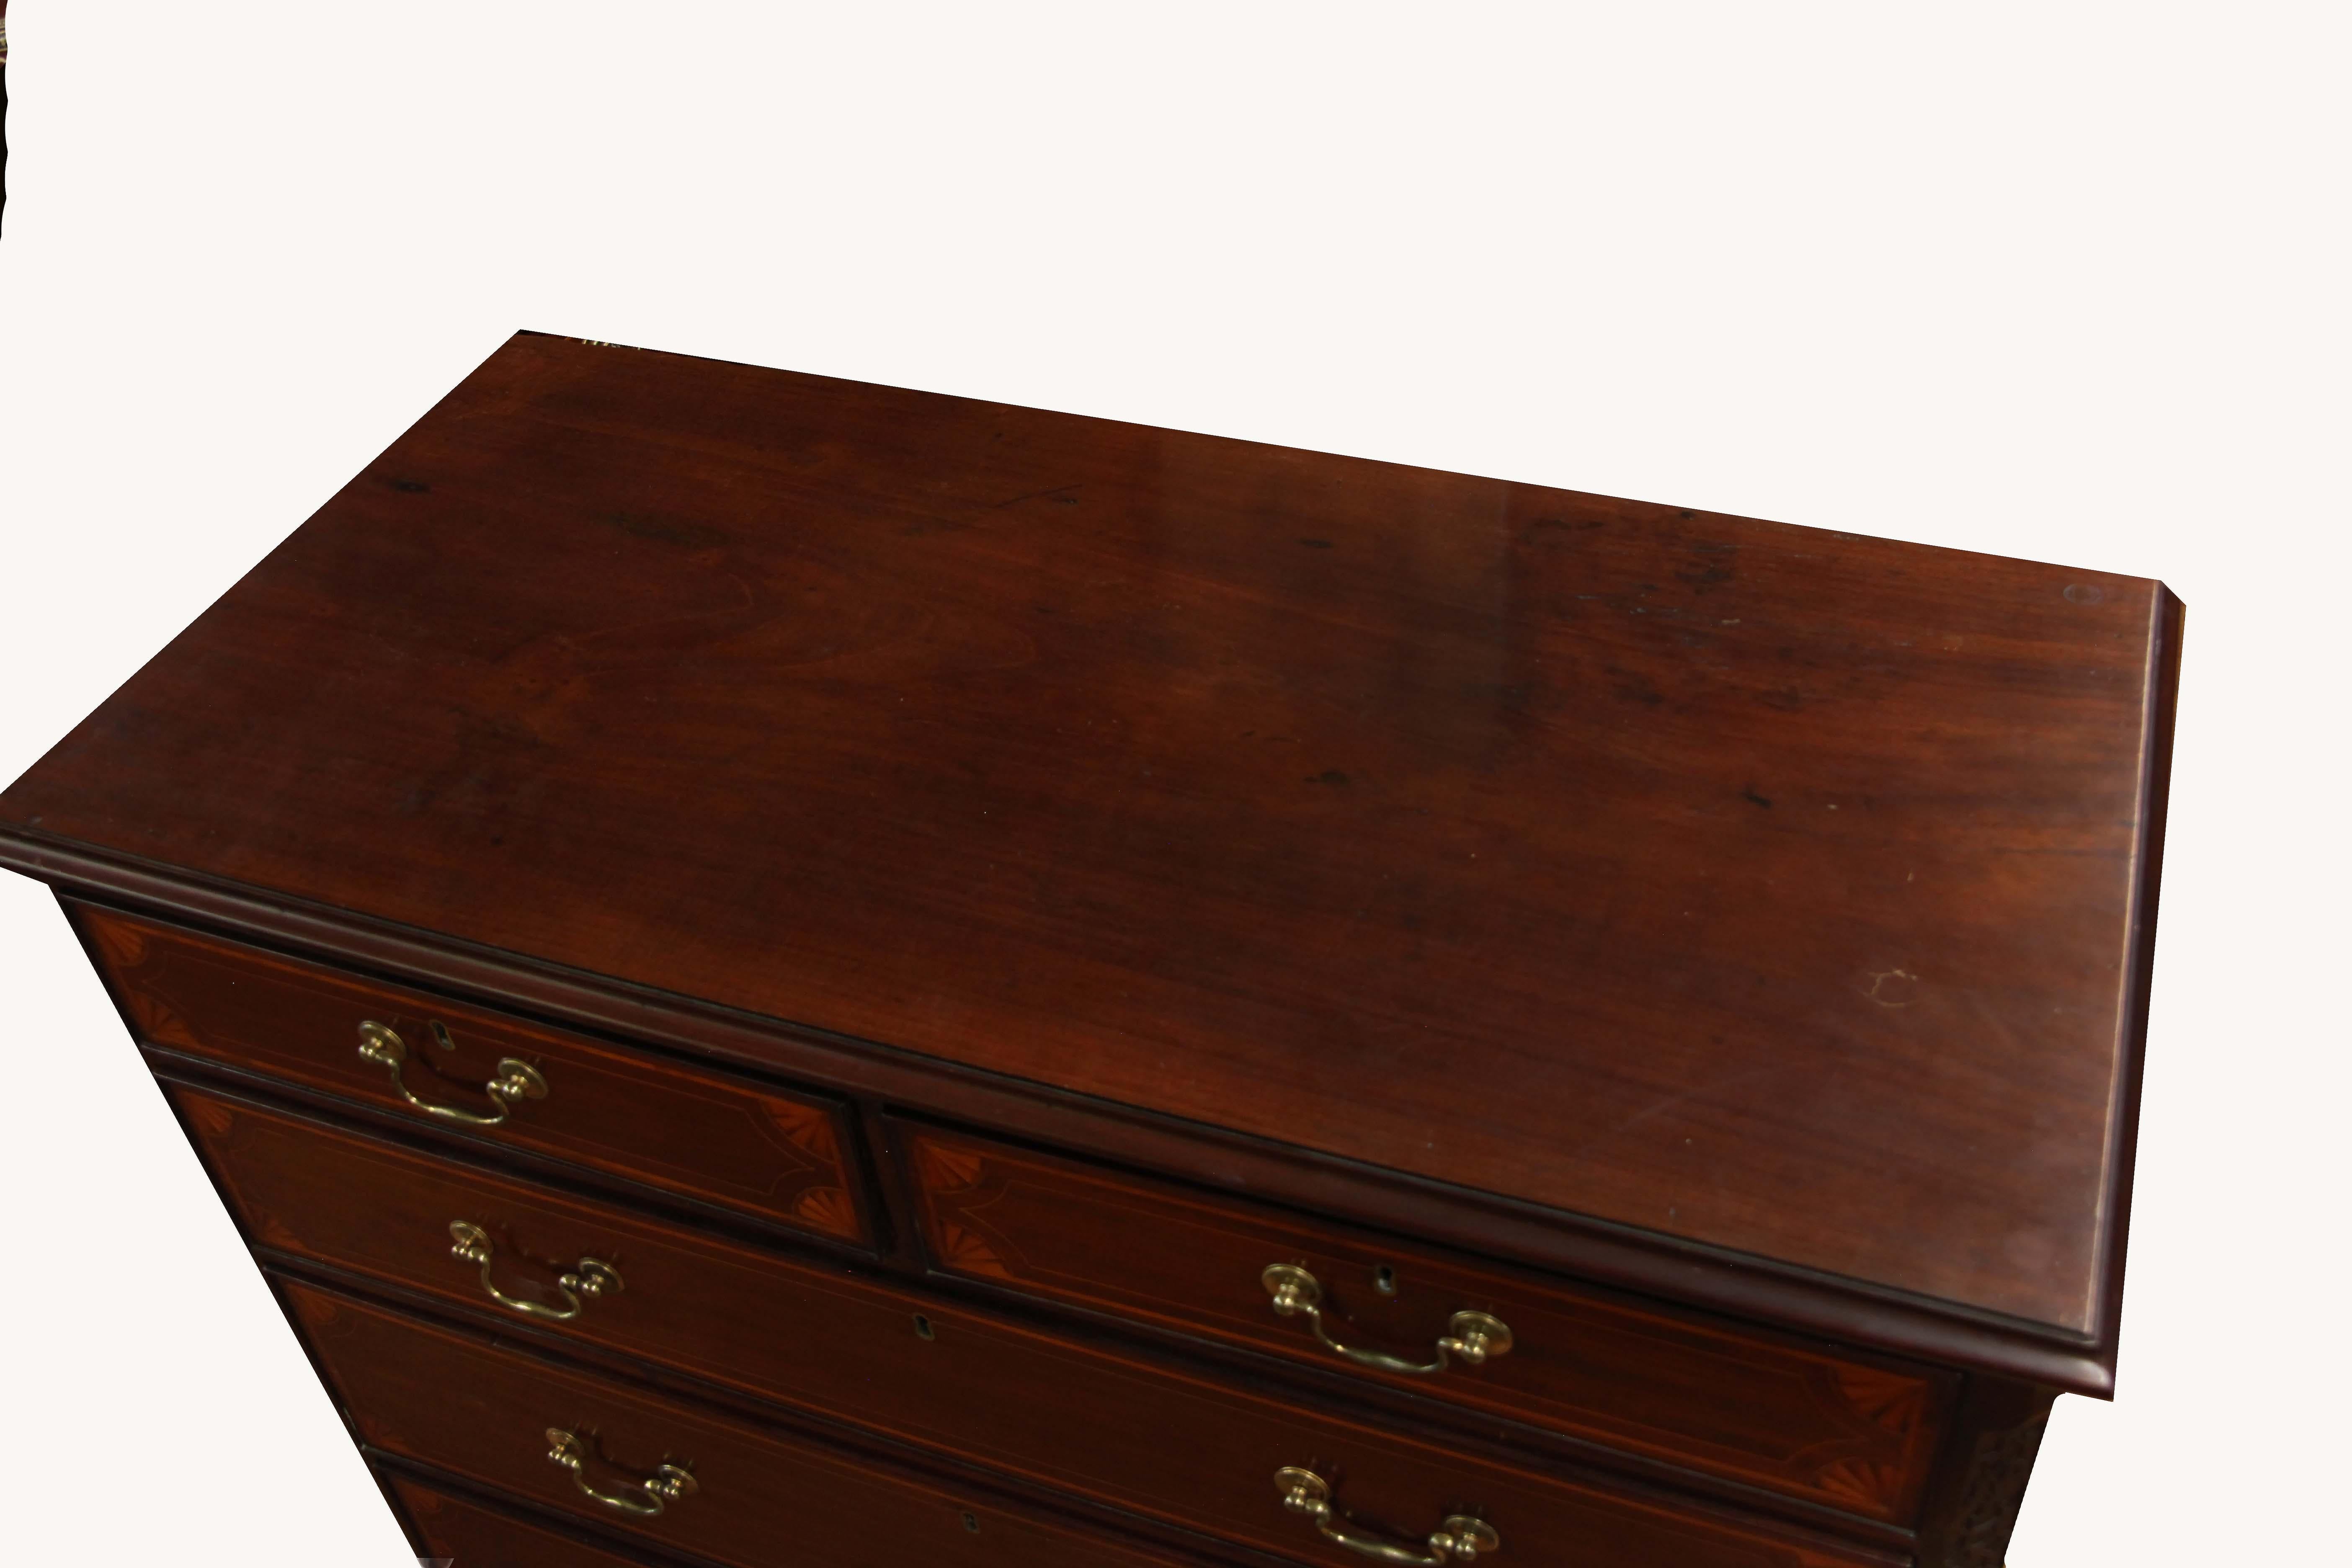 George III inlaid mahogany chest with blind fretwork chamfered corners. The drawers have inlaid quarter fans and boxwood line inlay. The hardware is original.